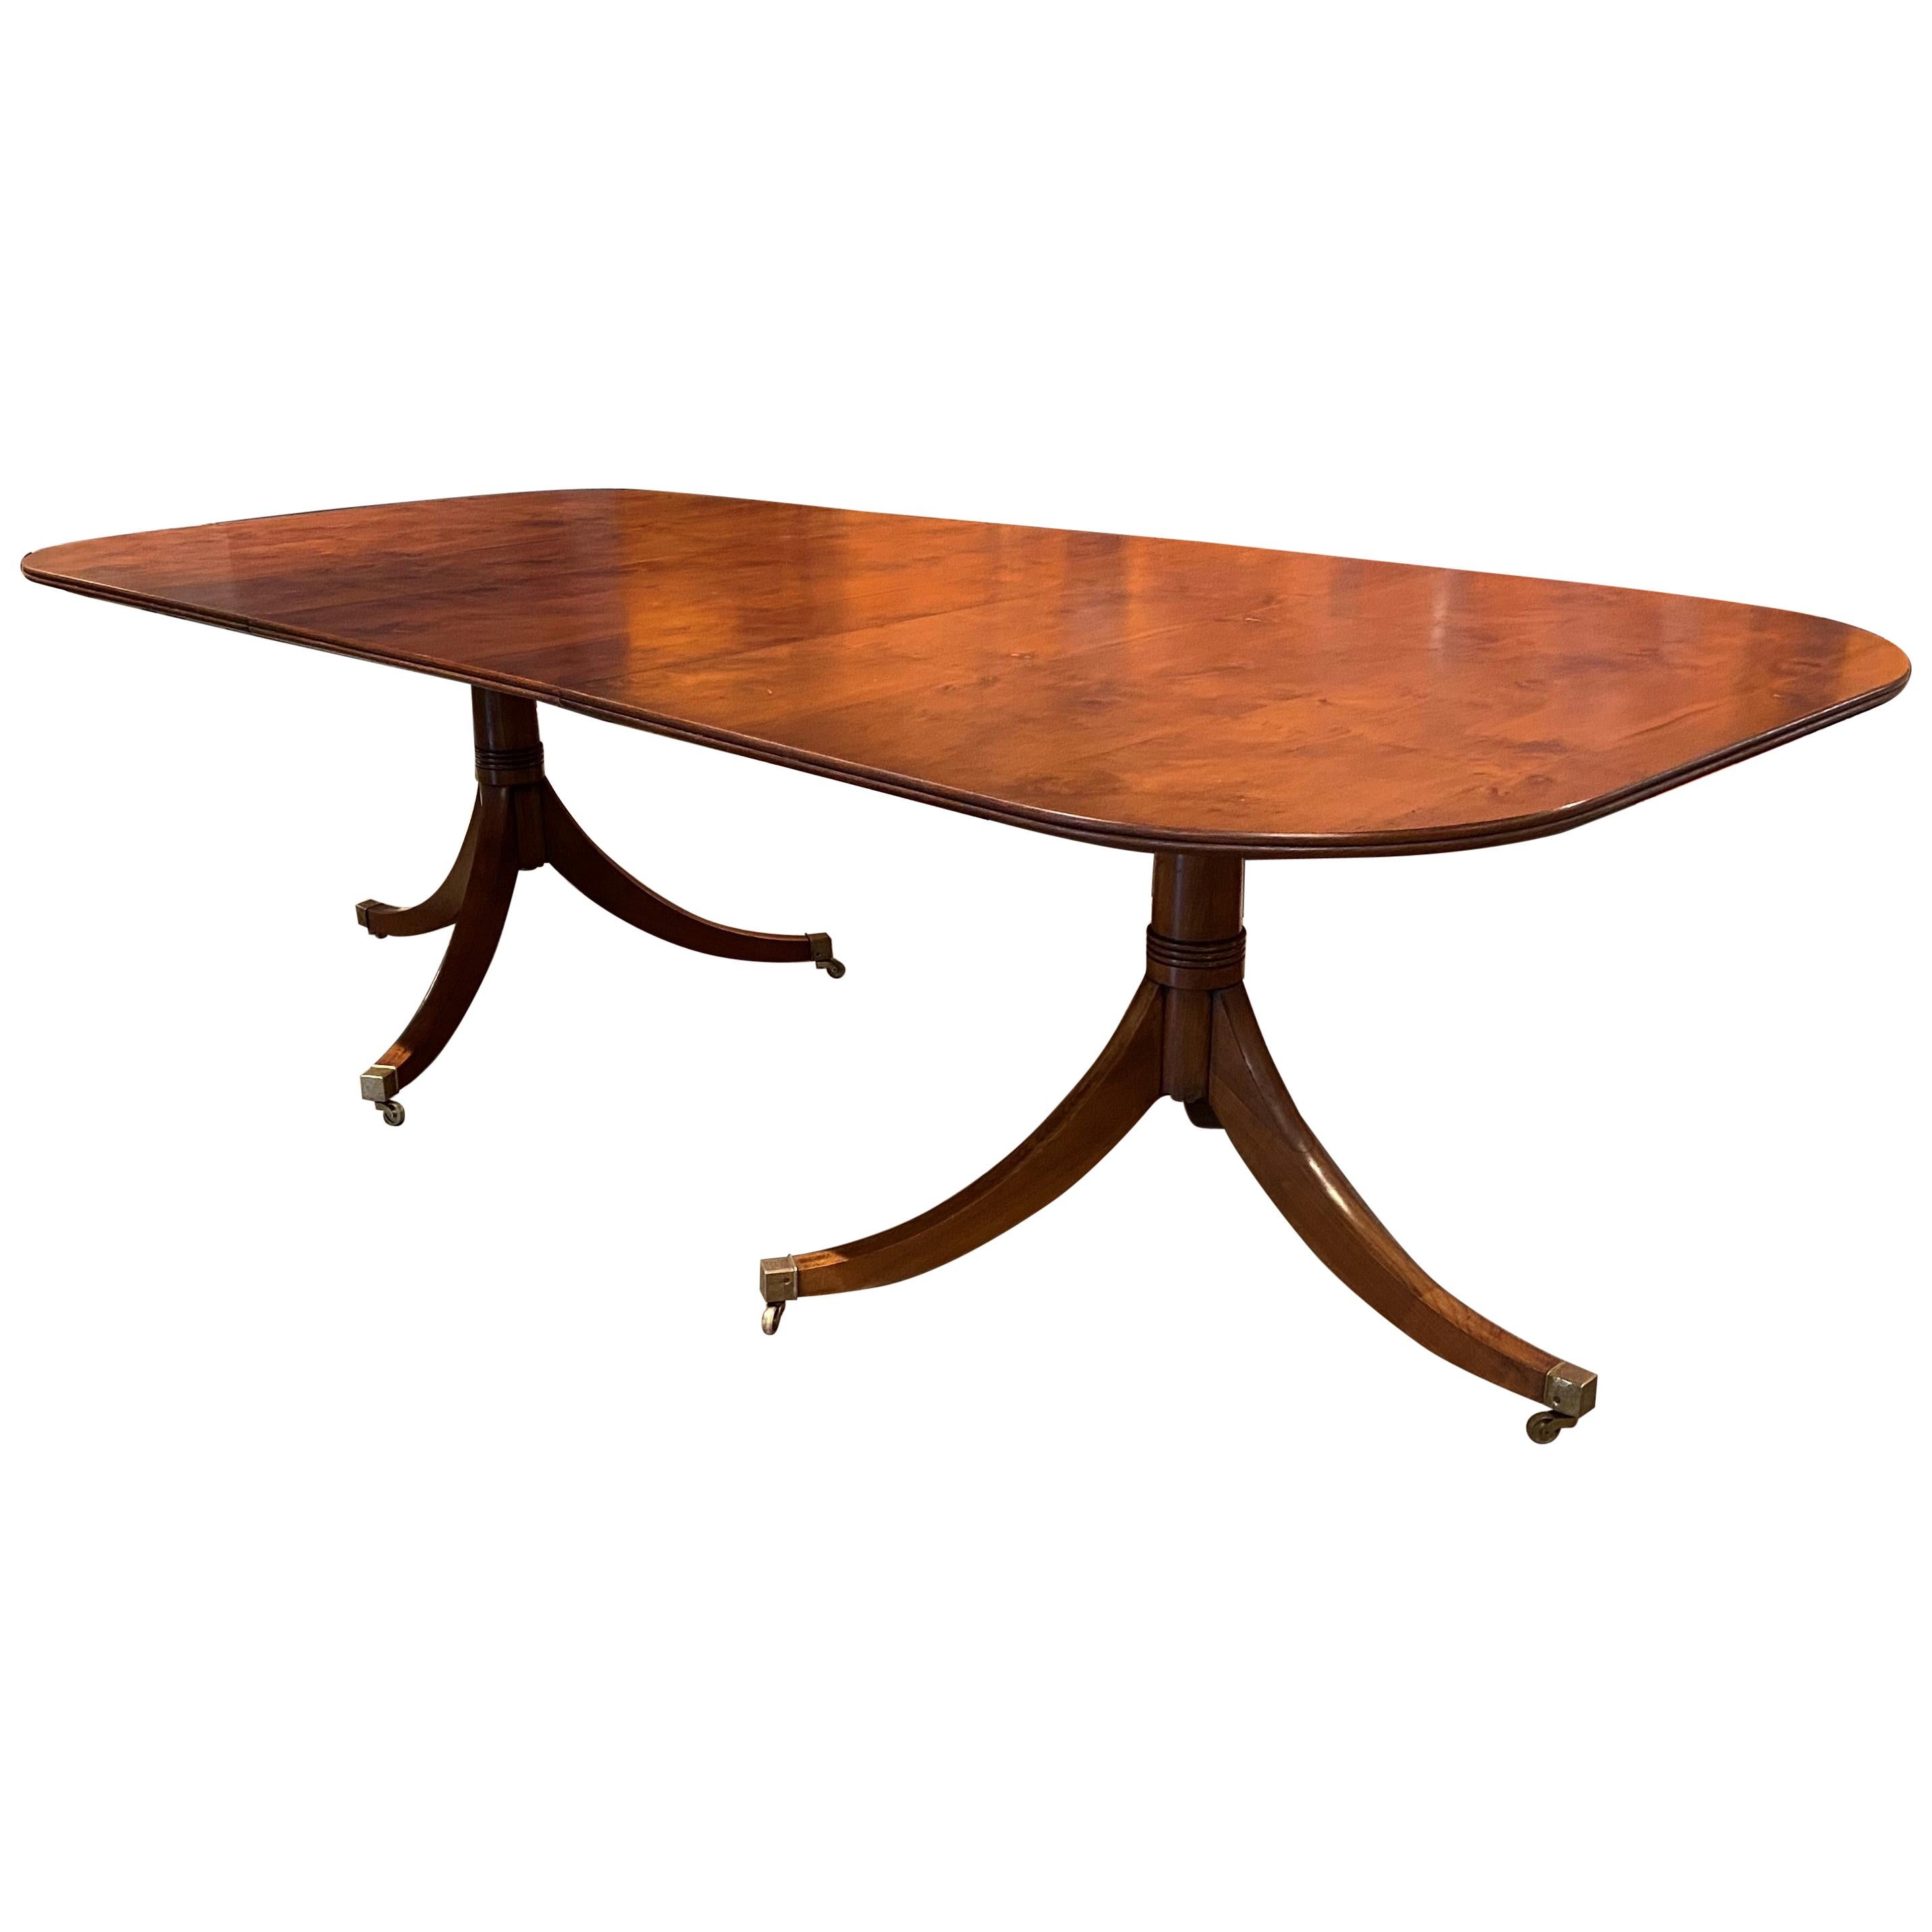 20th Century English Yew Wood Double Pedestal Dining Table with One Leaf